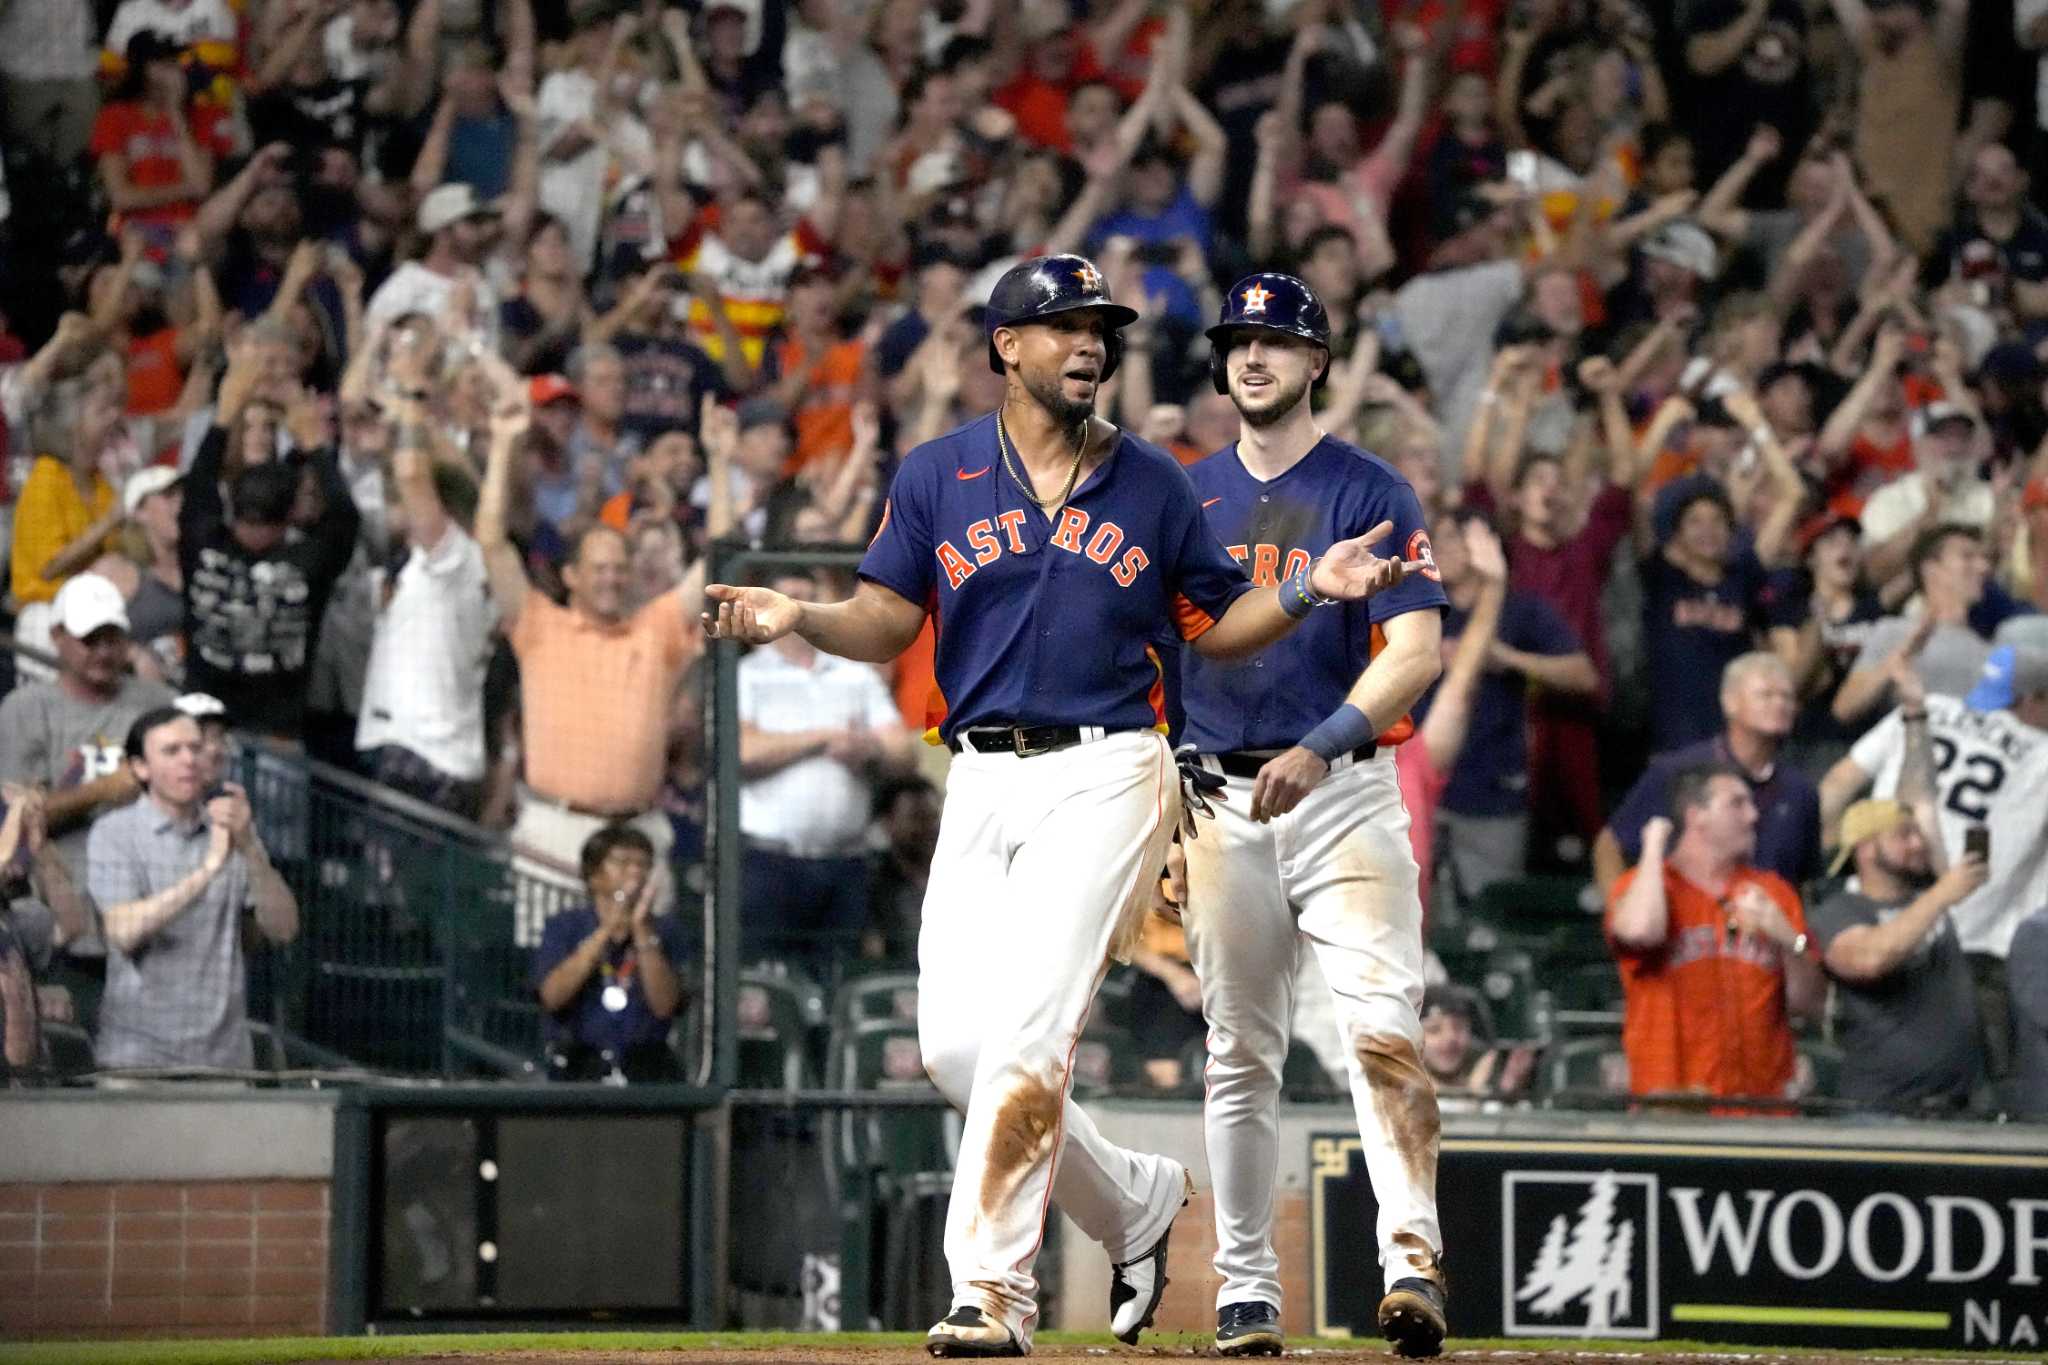 Houston Astros win for ninth time in 10 games as best start ever continues